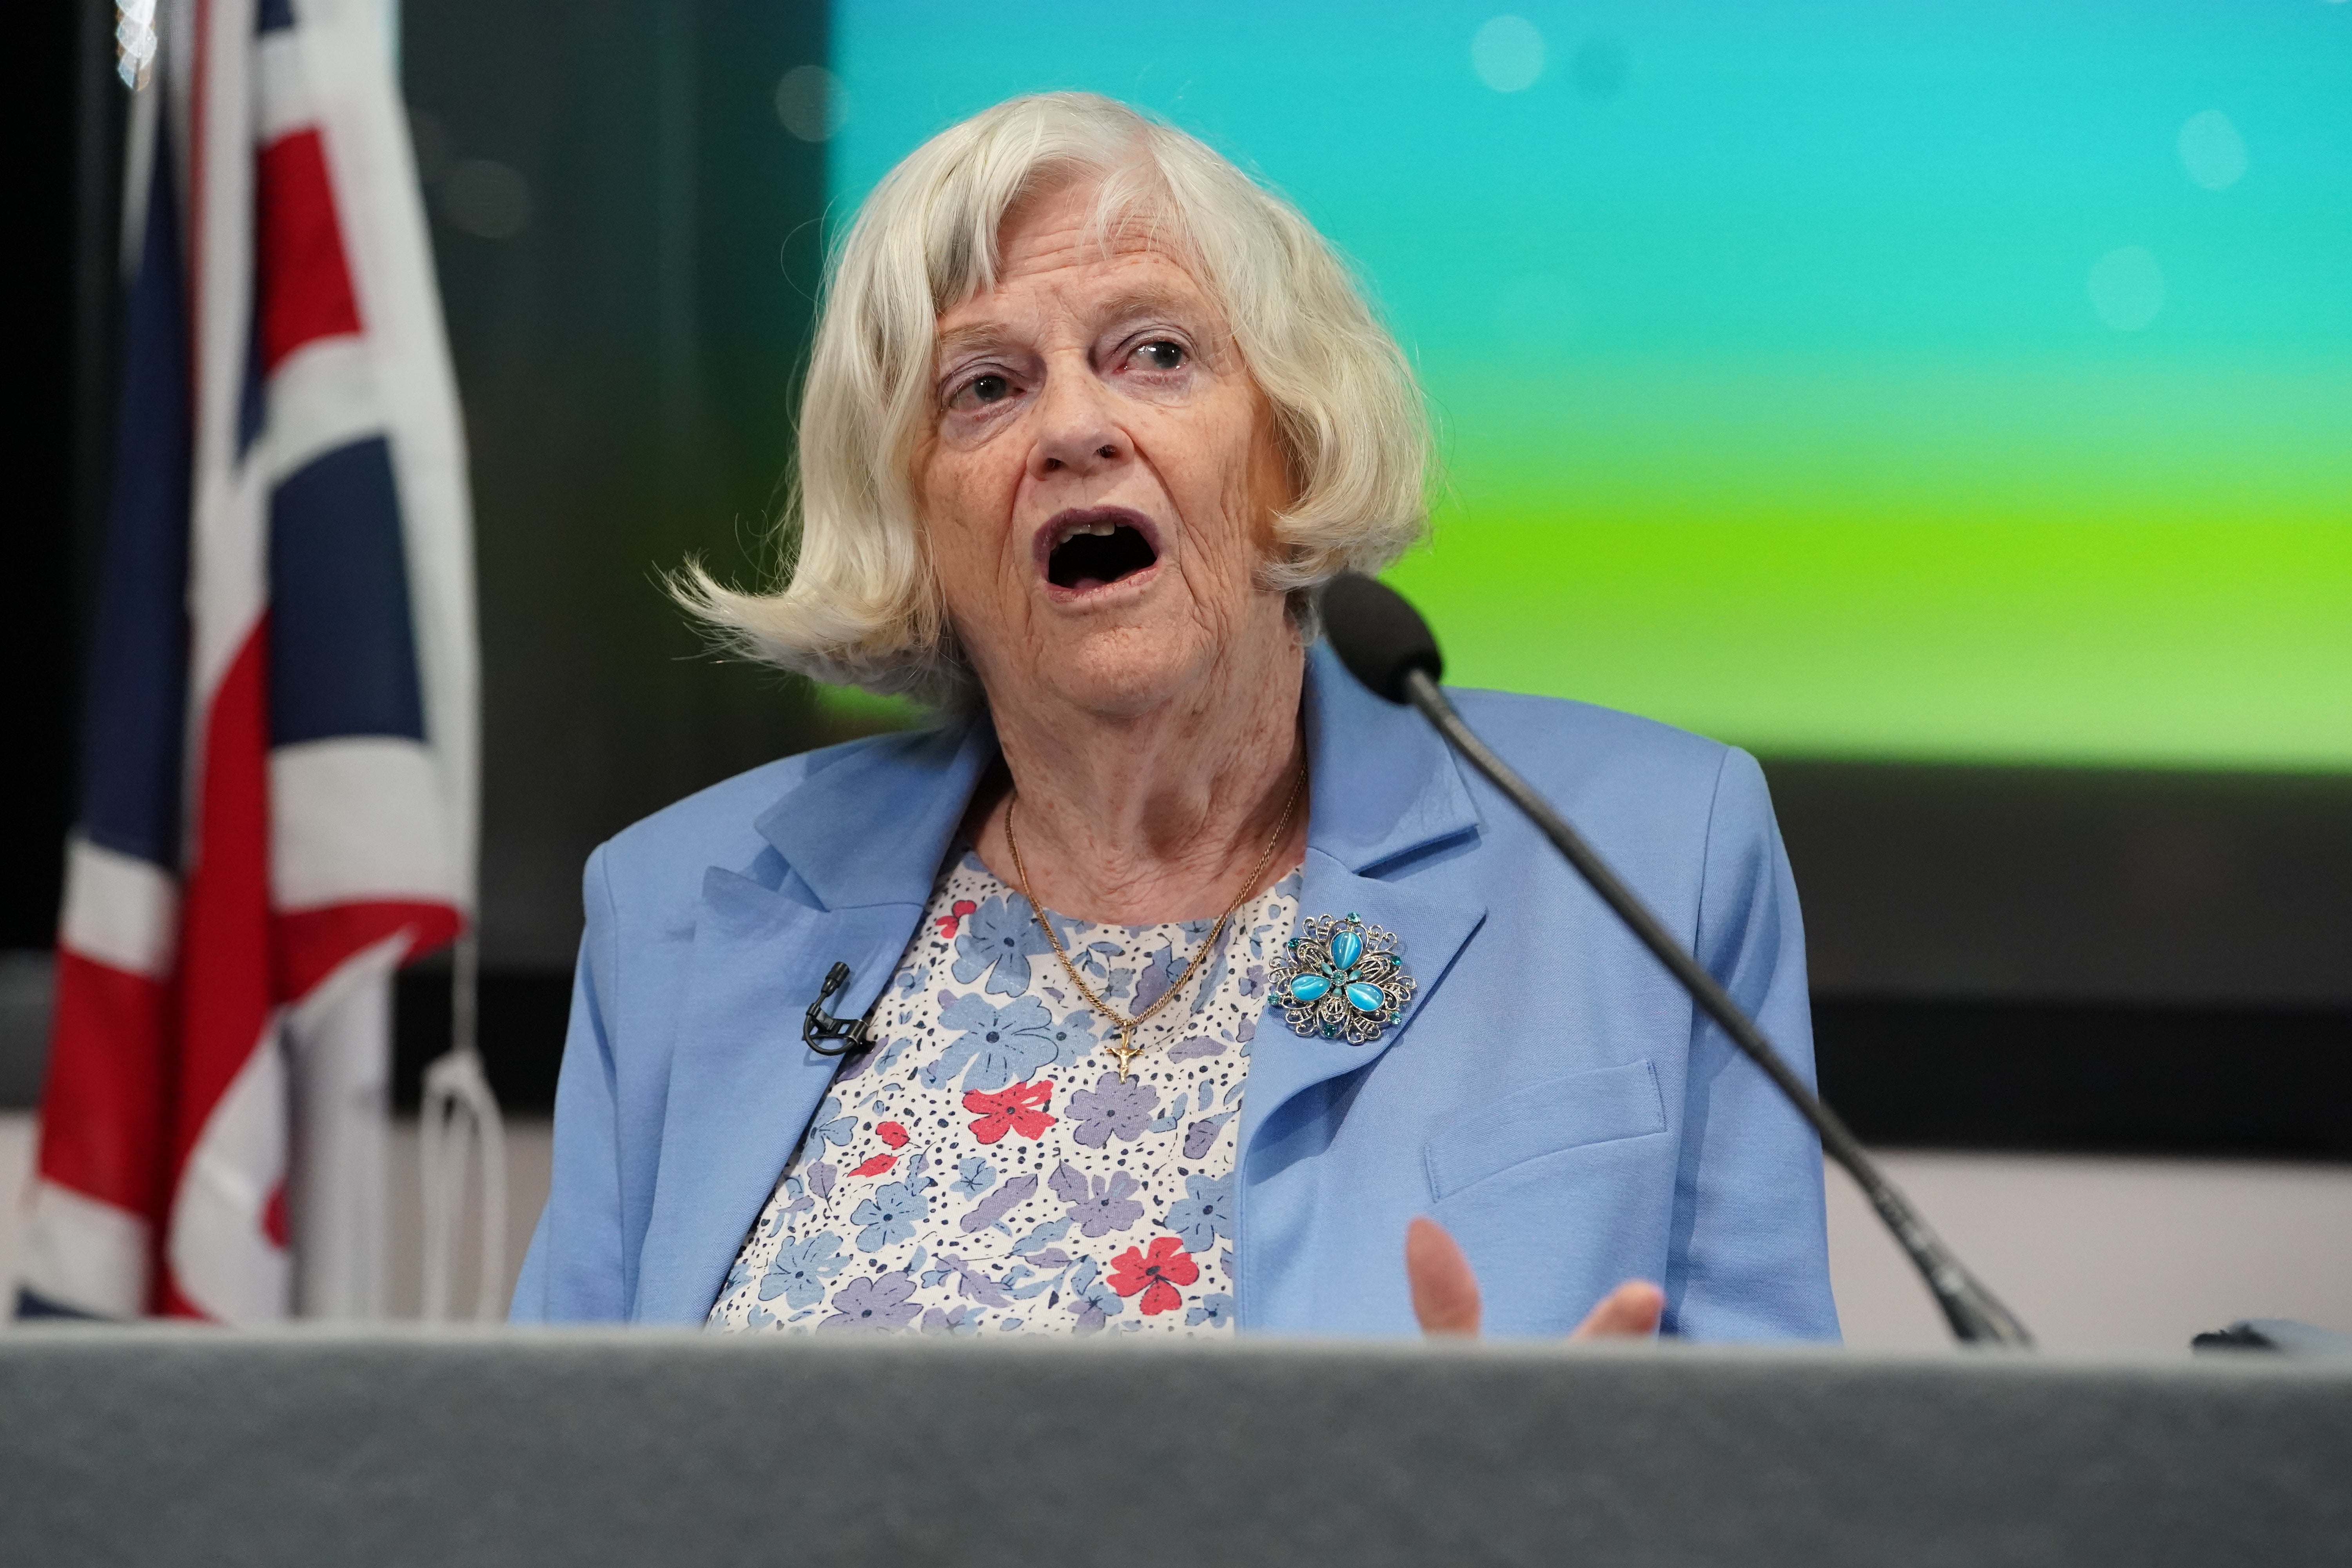 Ann Widdecombe speaking during a Reform UK General Election campaign launch (Lucy North/PA)